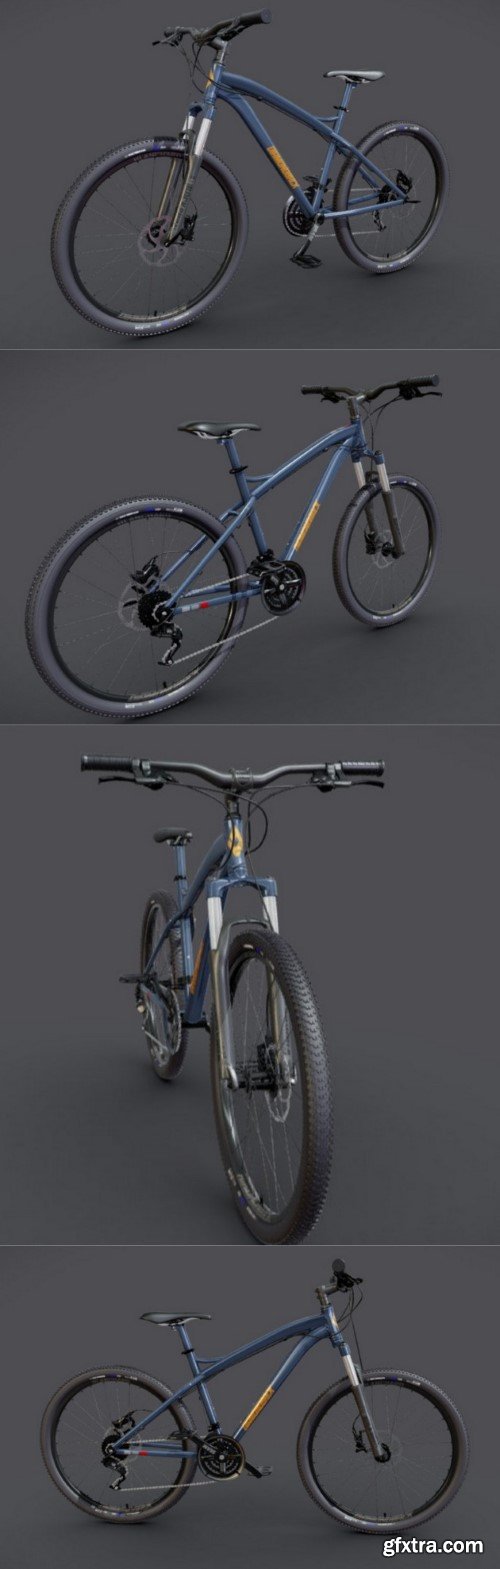 Sports Cycle 3D Model